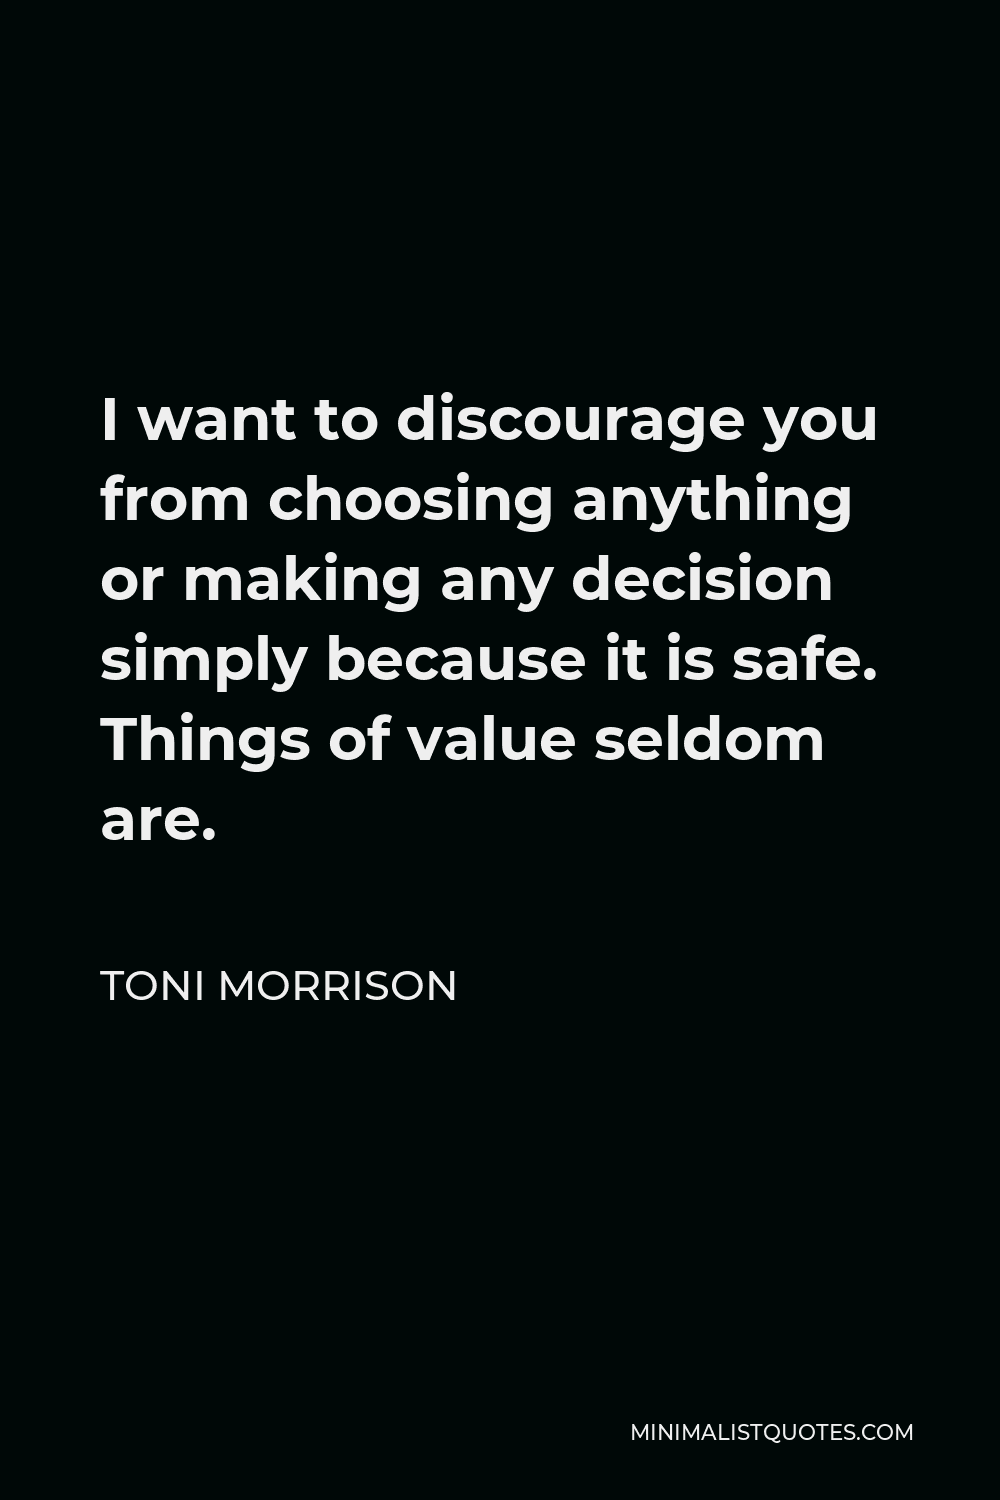 Toni Morrison Quote - I want to discourage you from choosing anything or making any decision simply because it is safe. Things of value seldom are.